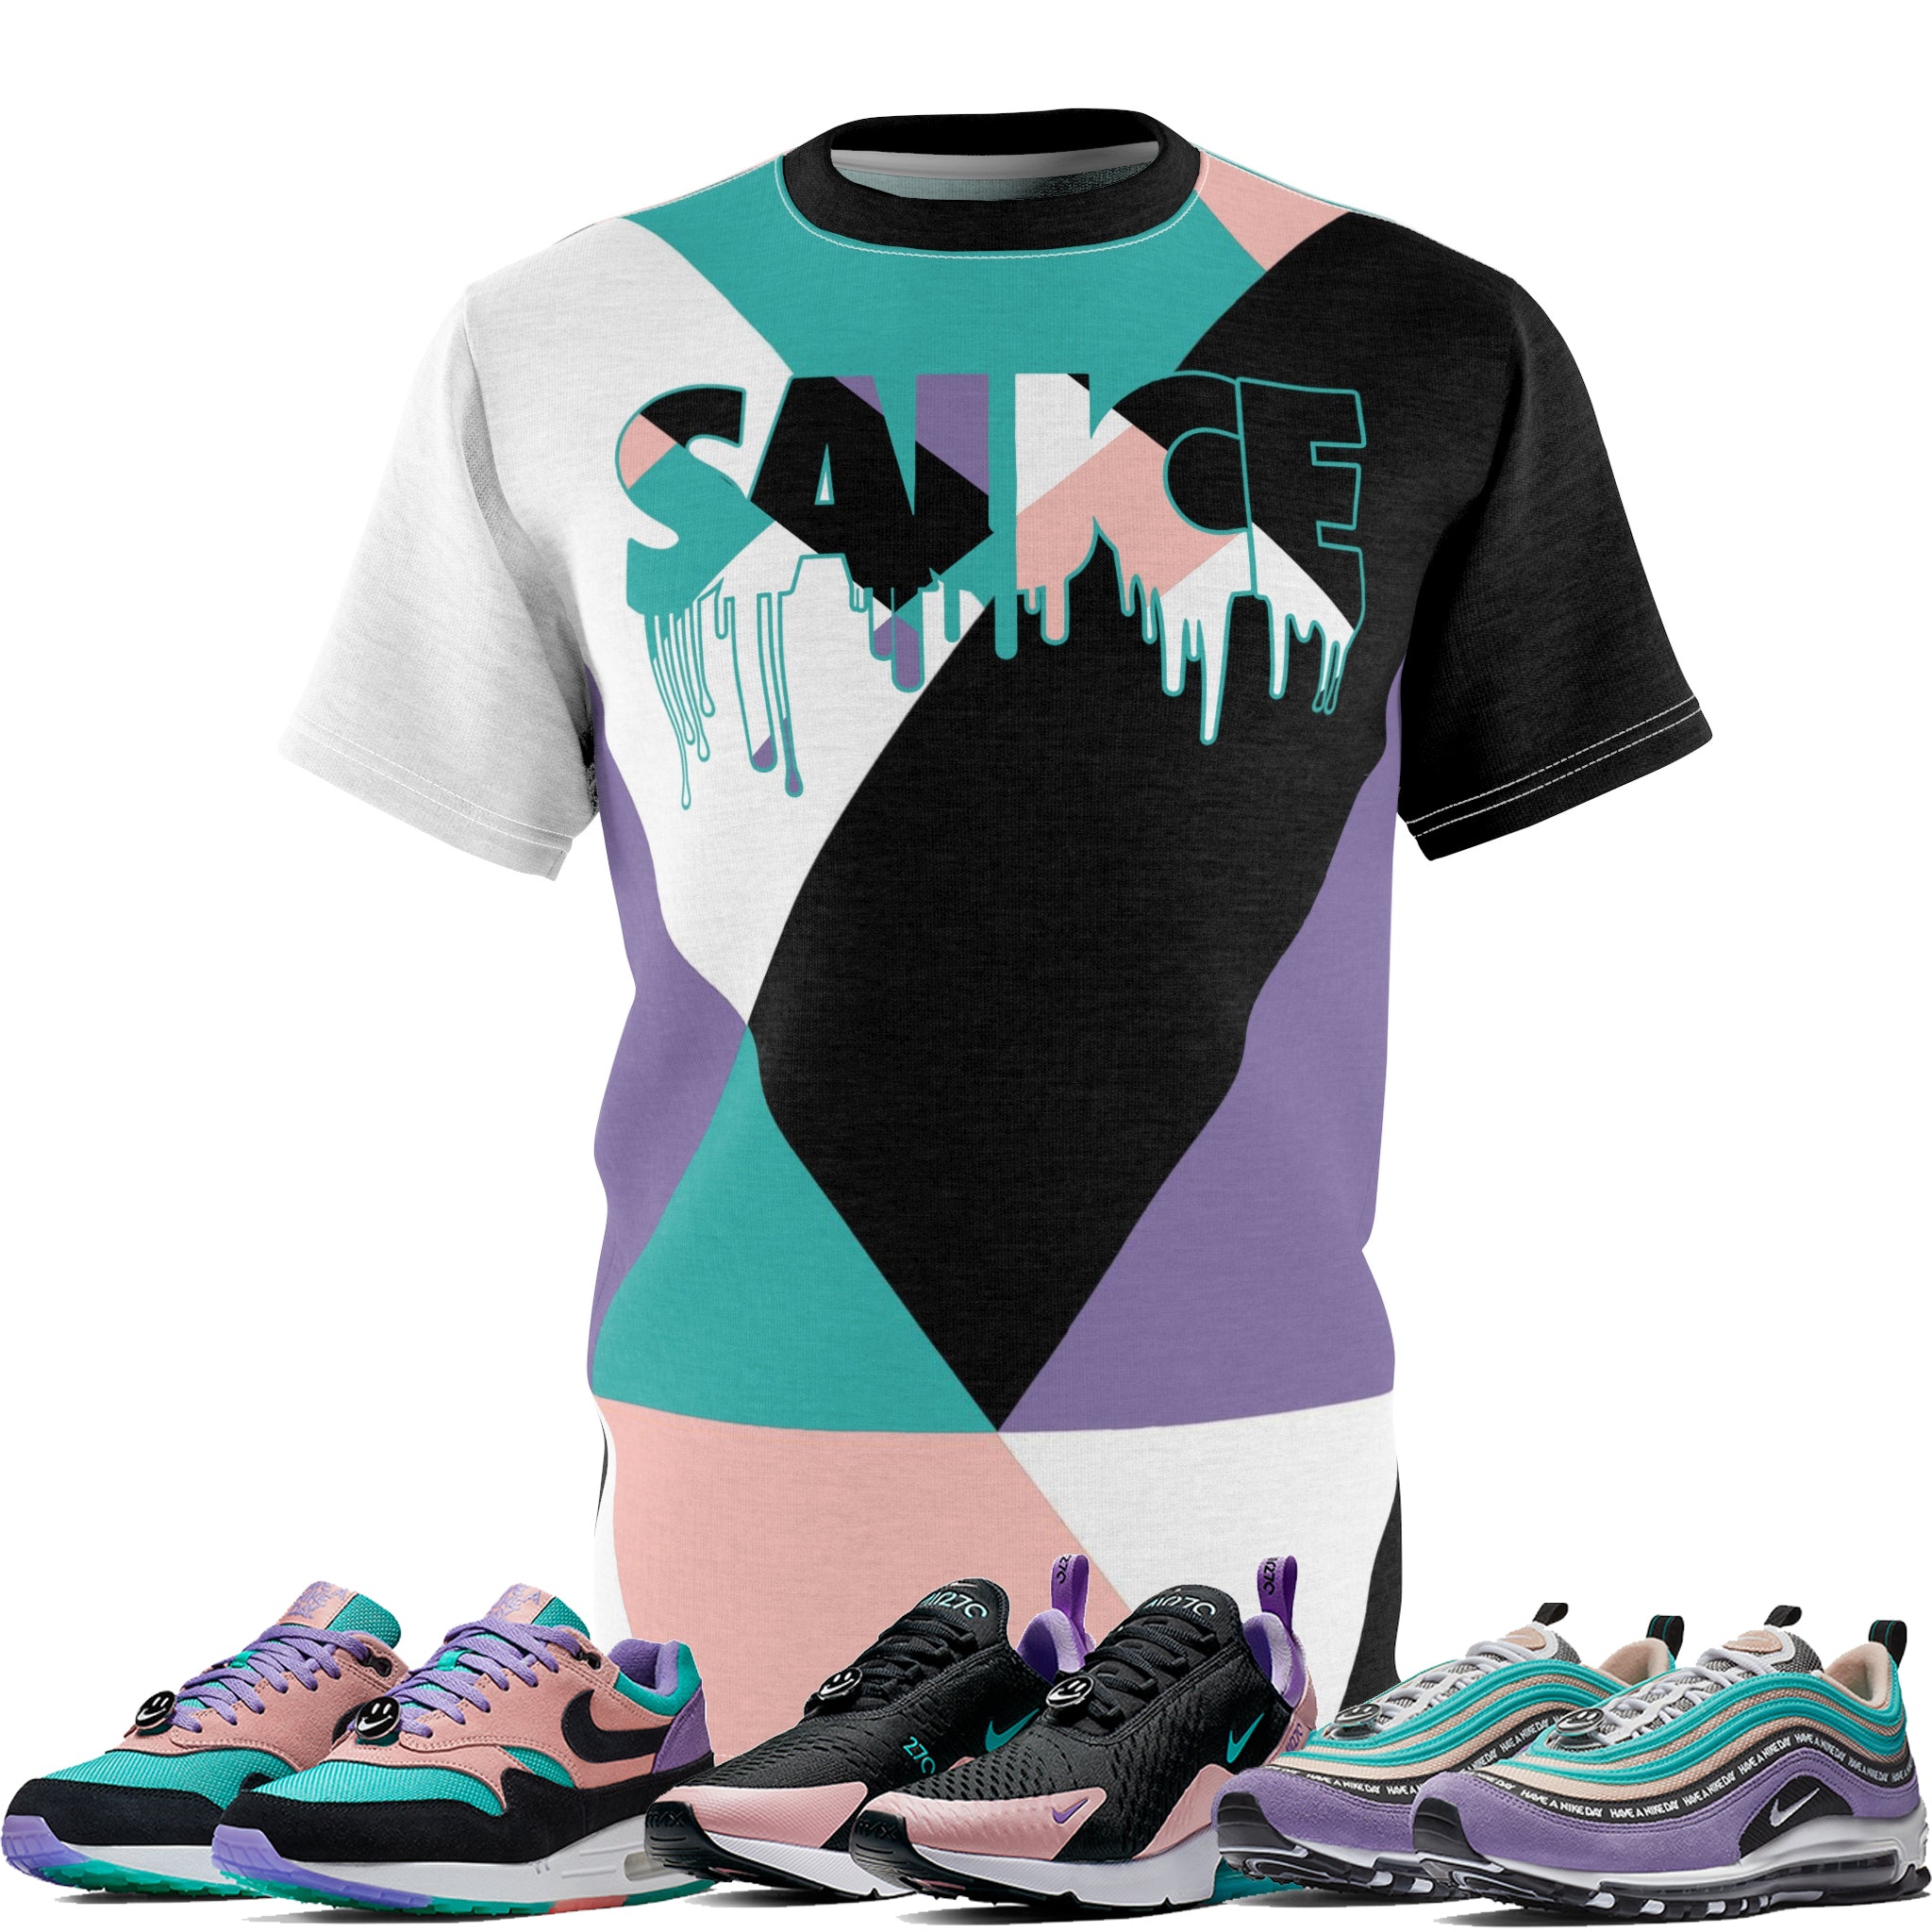 Shirt to Match Air Max Have Nike Day Sneaker Colorway "Sauce" T- – NowServingShirts